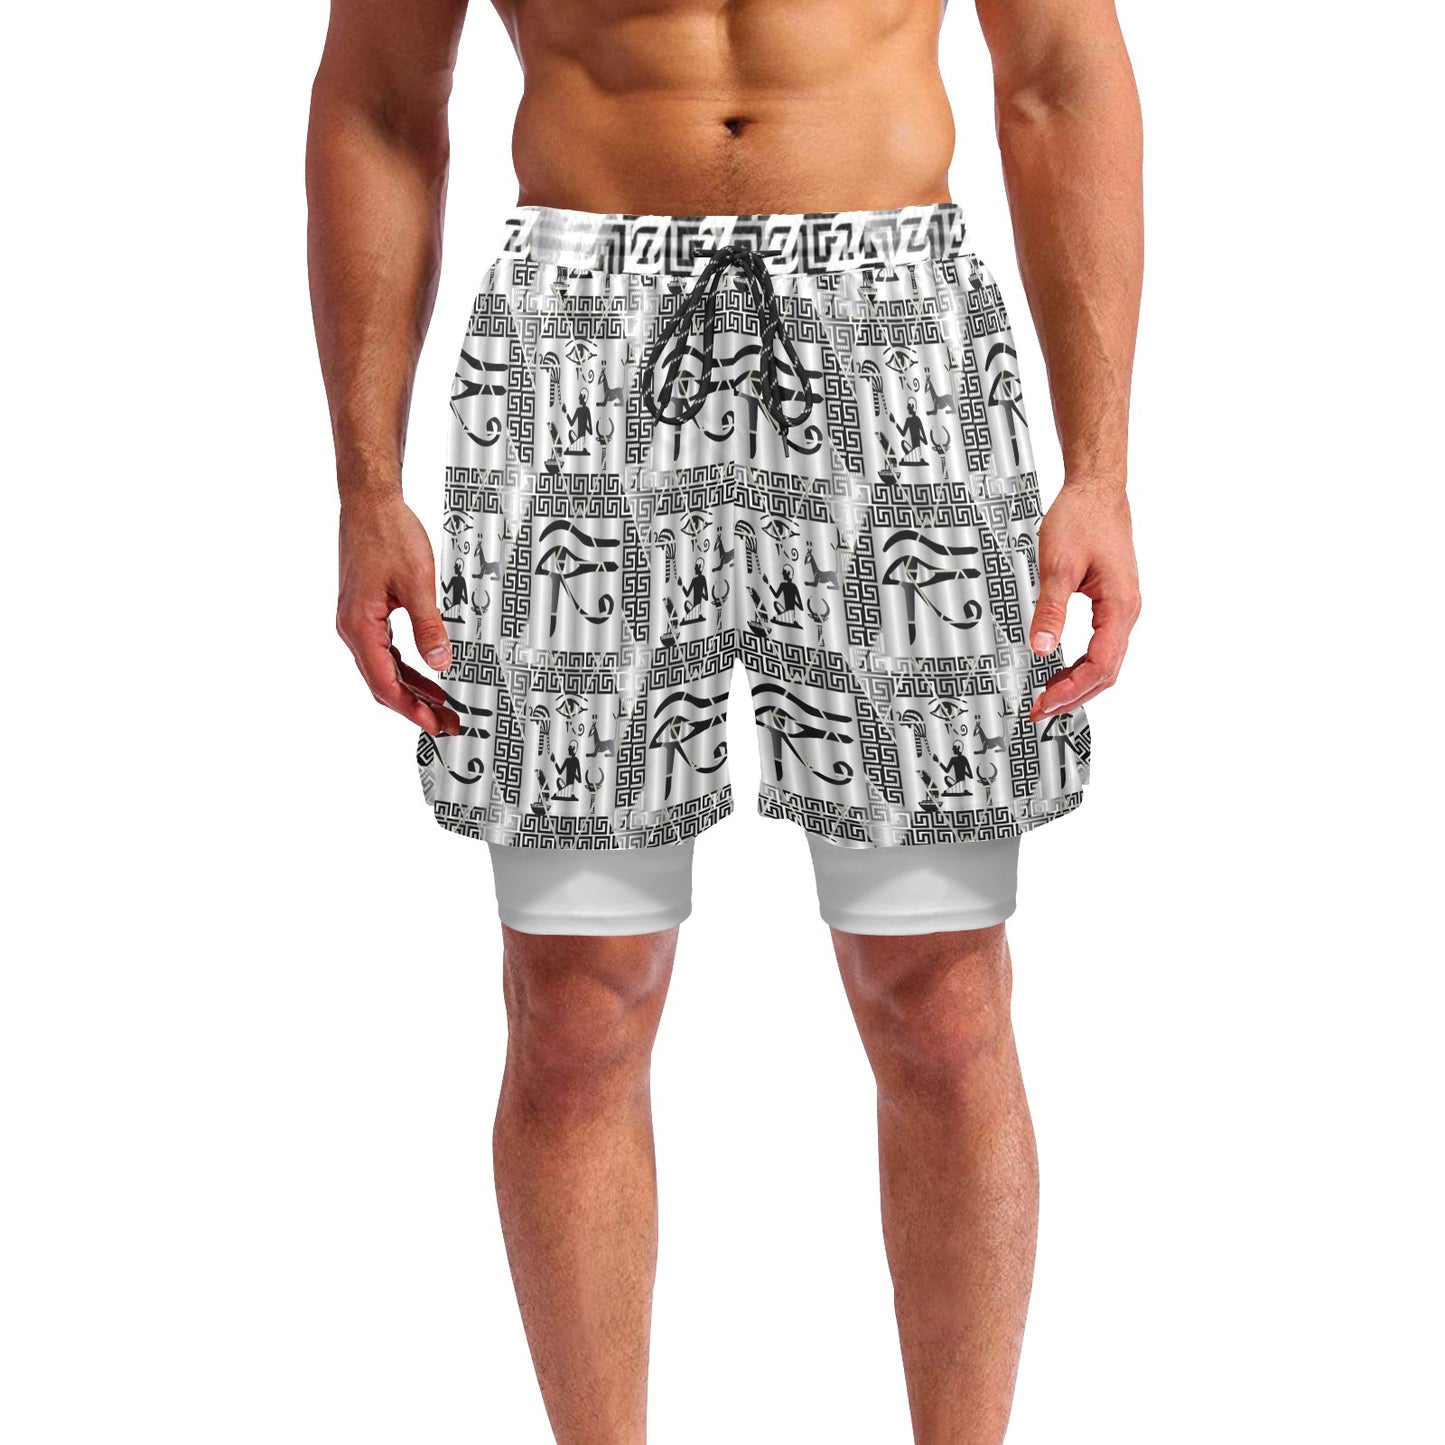 Zen Shorts with Liner - All seeing eye